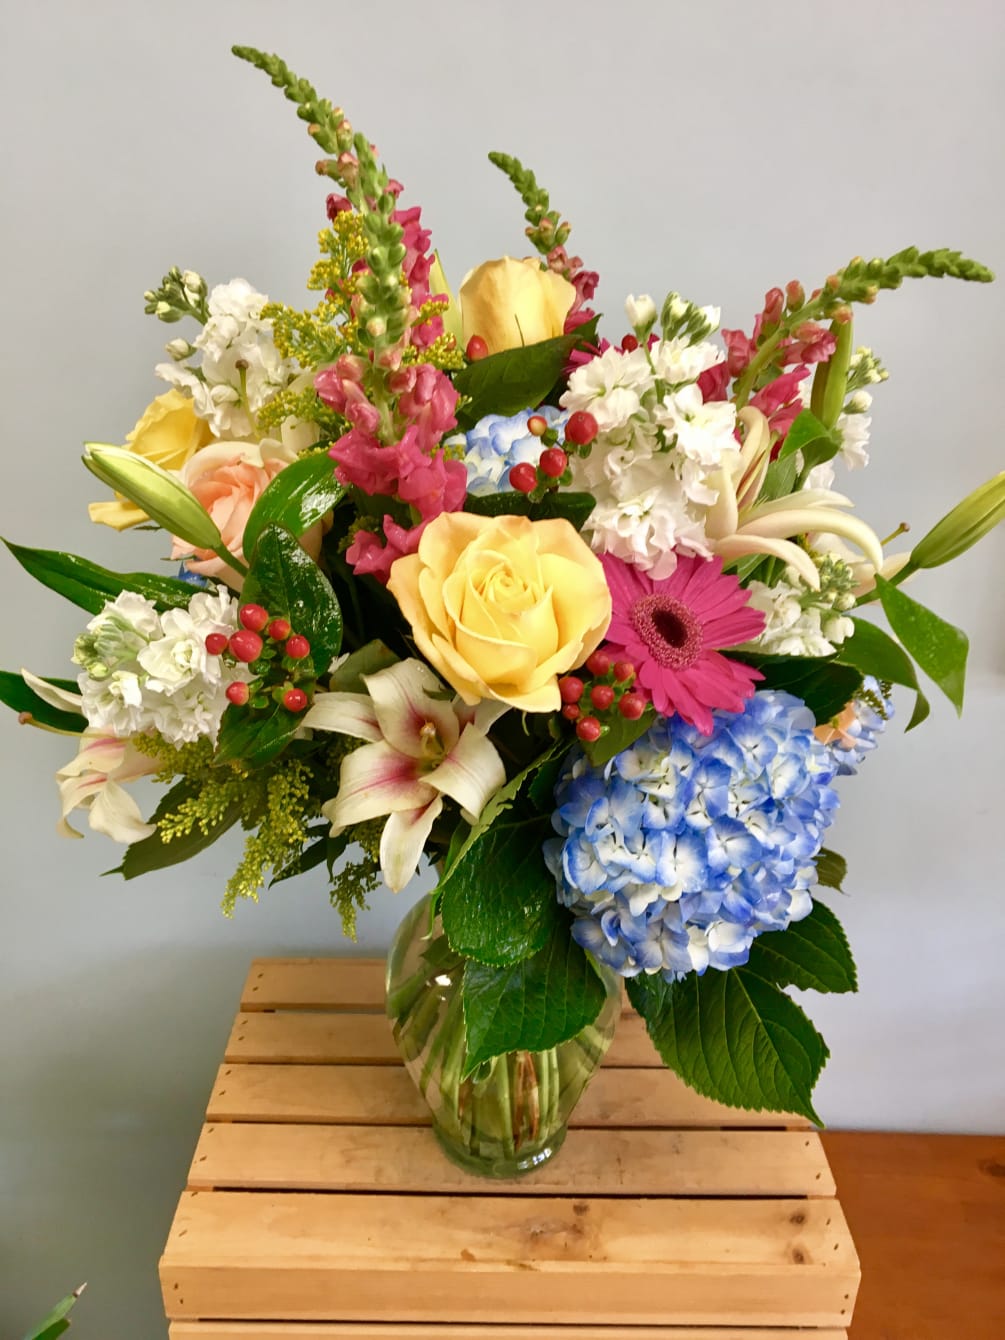 This big and beautiful arrangement says it all and is perfect for